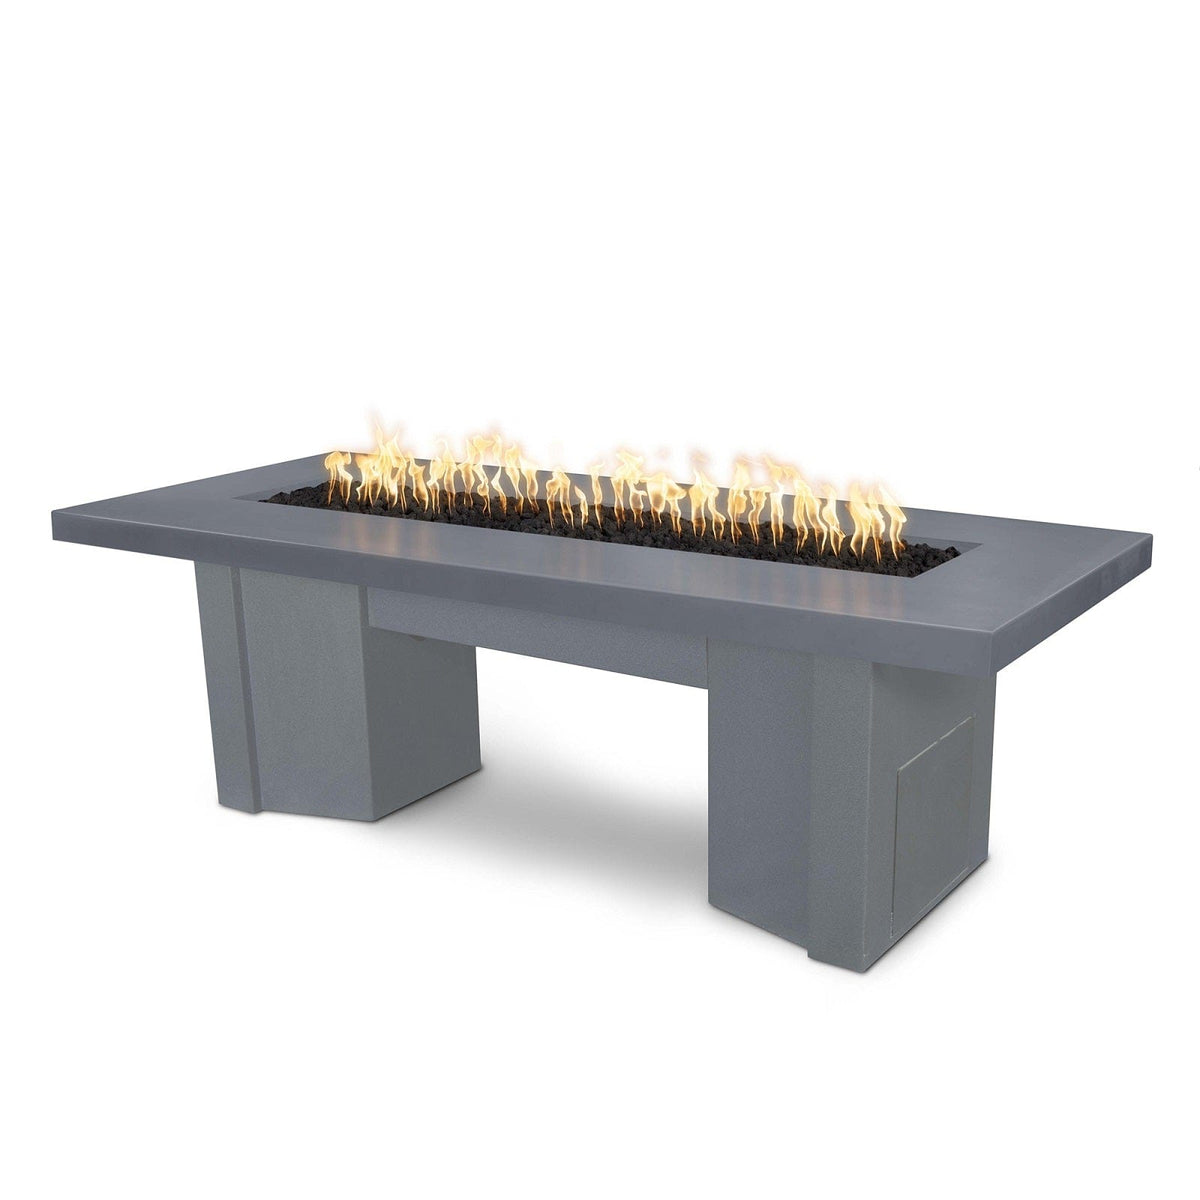 The Outdoor Plus Fire Features Gray (-GRY) / Gray Powder Coated Steel (-GRY) The Outdoor Plus 60&quot; Alameda Fire Table Smooth Concrete in Liquid Propane - Flame Sense System with Push Button Spark Igniter / OPT-ALMGFRC60FSEN-LP